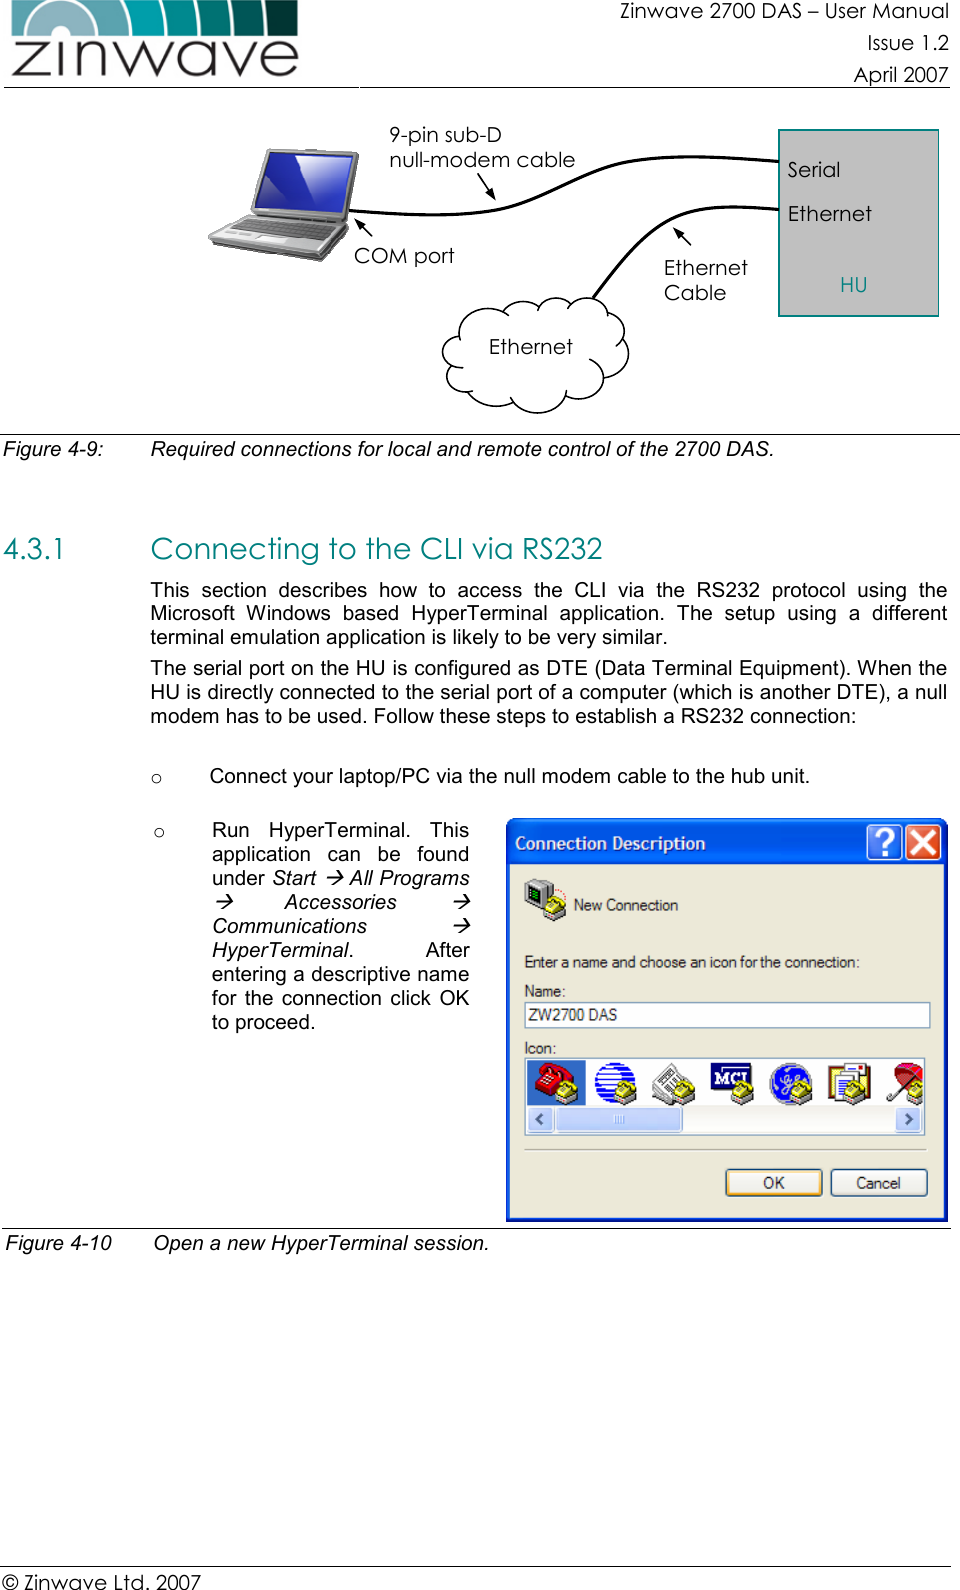 Zinwave 2700 DAS – User Manual Issue 1.2  April 2007  © Zinwave Ltd. 2007   Figure 4-9:  Required connections for local and remote control of the 2700 DAS.  4.3.1 Connecting to the CLI via RS232 This  section  describes  how  to  access  the  CLI  via  the  RS232  protocol  using  the Microsoft  Windows  based  HyperTerminal  application.  The  setup  using  a  different terminal emulation application is likely to be very similar.  The serial port on the HU is configured as DTE (Data Terminal Equipment). When the HU is directly connected to the serial port of a computer (which is another DTE), a null modem has to be used. Follow these steps to establish a RS232 connection:  o  Connect your laptop/PC via the null modem cable to the hub unit.  o  Run  HyperTerminal.  This application  can  be  found under Start  All Programs   Accessories  Communications  HyperTerminal.    After entering a descriptive name for  the connection  click  OK to proceed.   Figure 4-10  Open a new HyperTerminal session.  Serial Ethernet HU COM port 9-pin sub-D  null-modem cable Ethernet Cable  Ethernet 